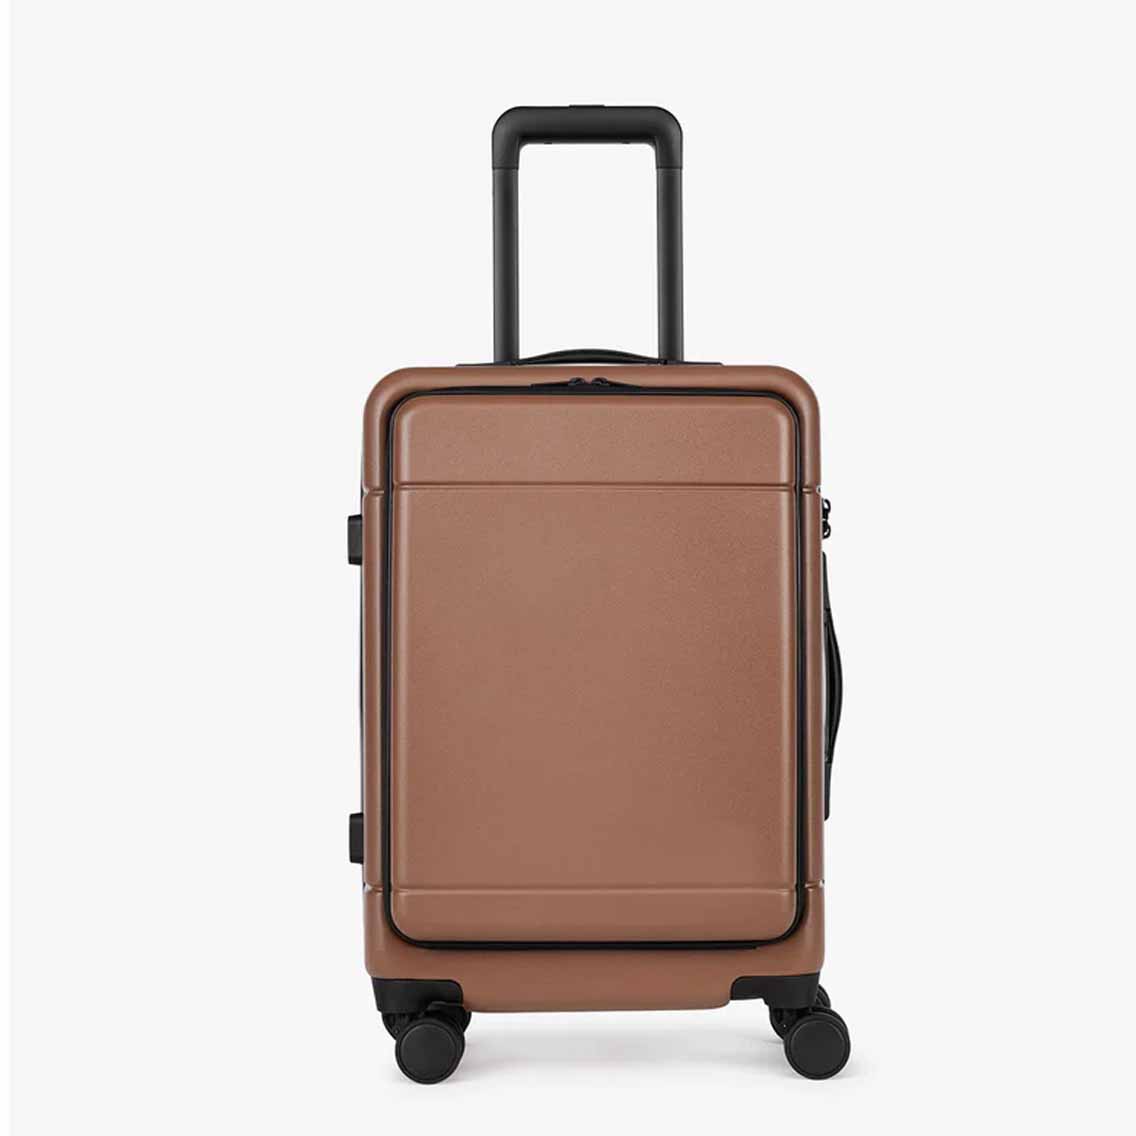 Calpak Hue Front Pocket Carry-On Luggage in brown